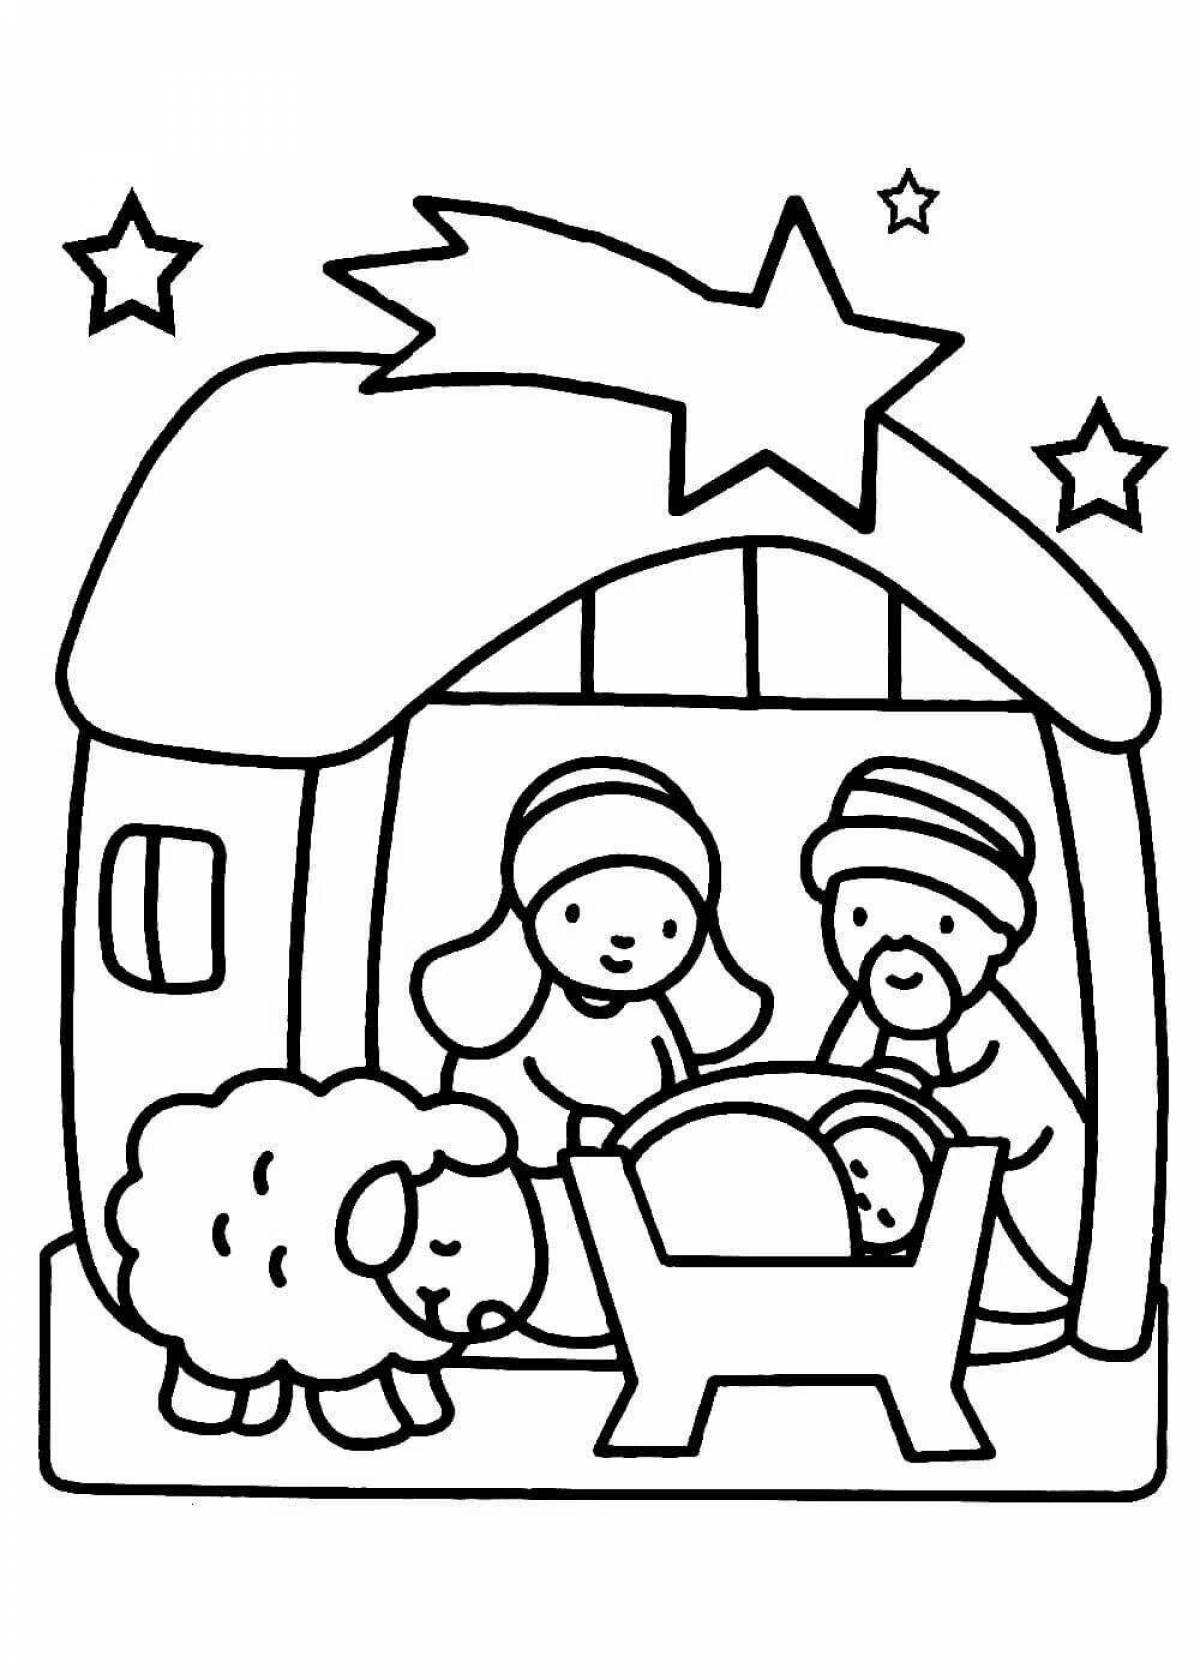 Festive Christmas coloring book for 5-6 year olds